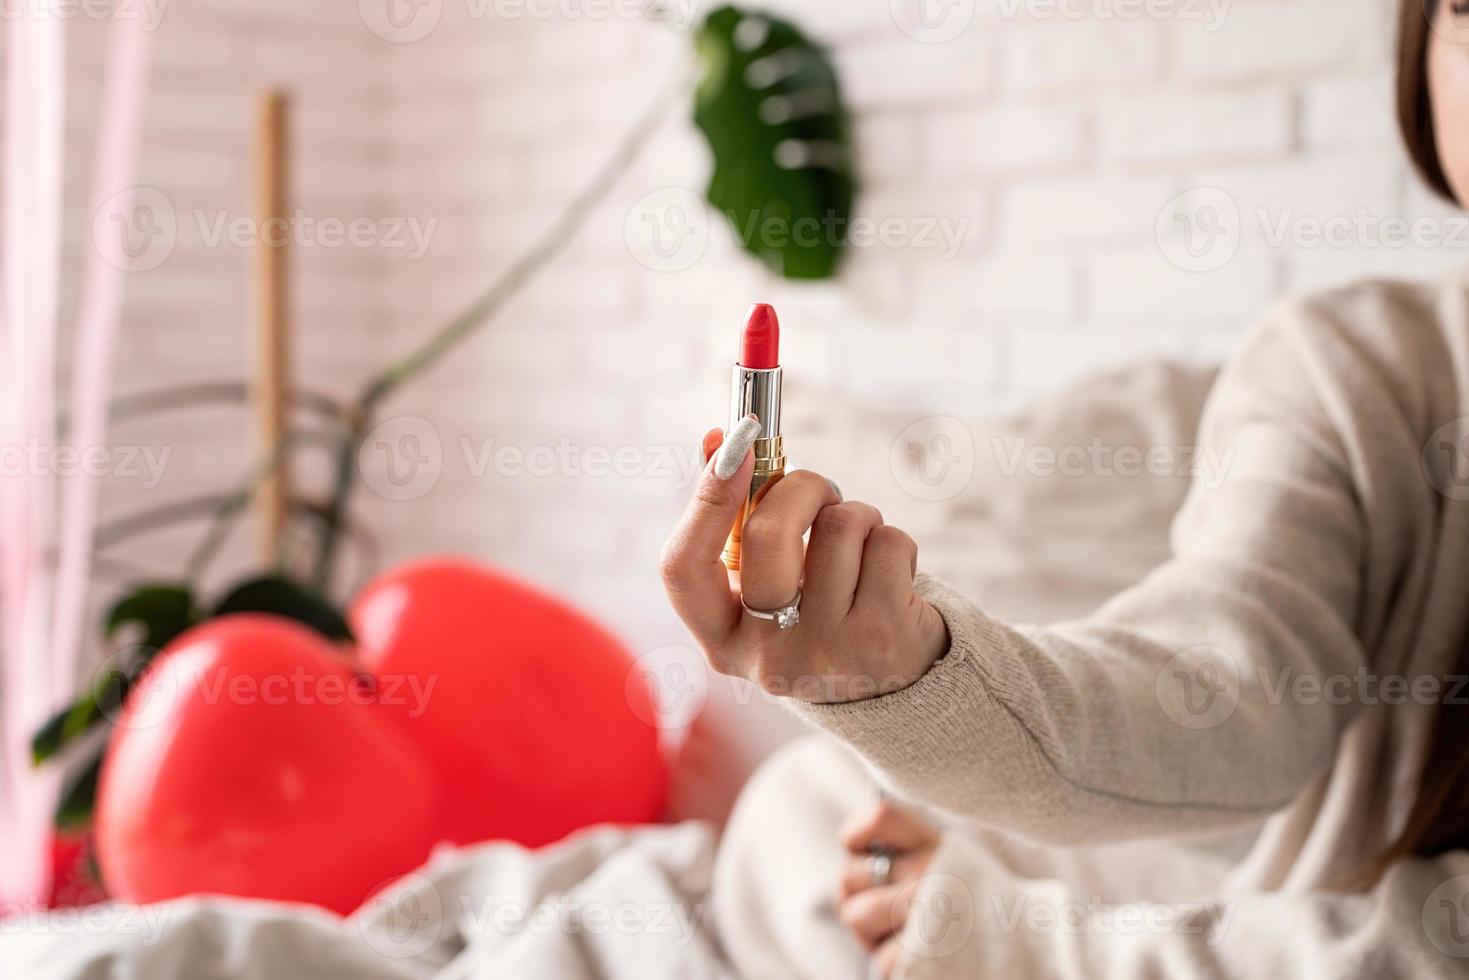 woman hand holding red lipstick photo